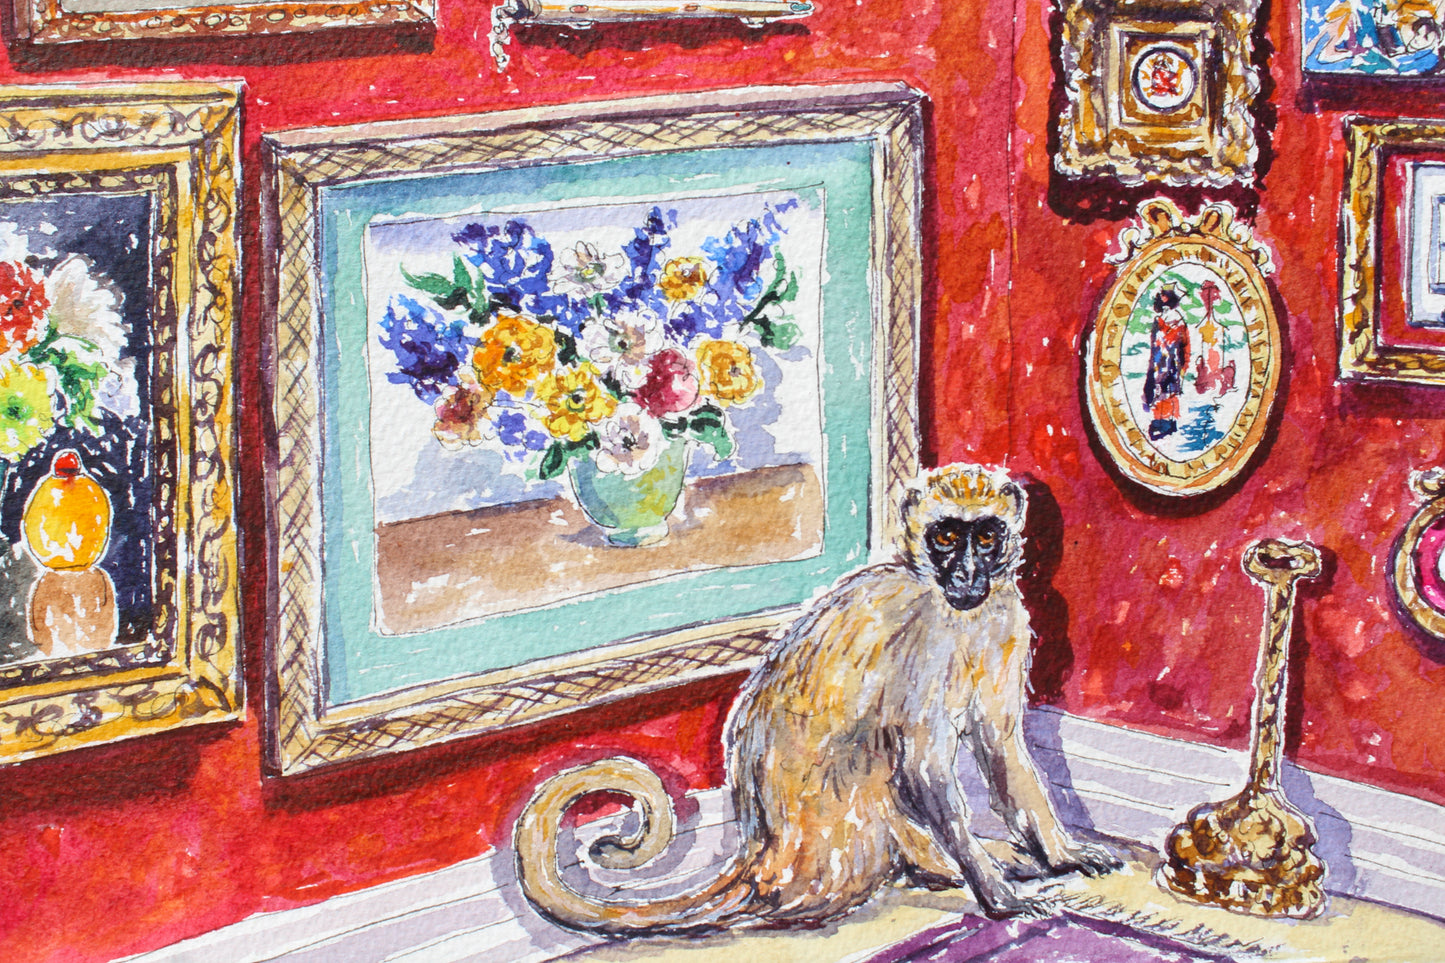 Monkey Sees (Commissioned Painting)